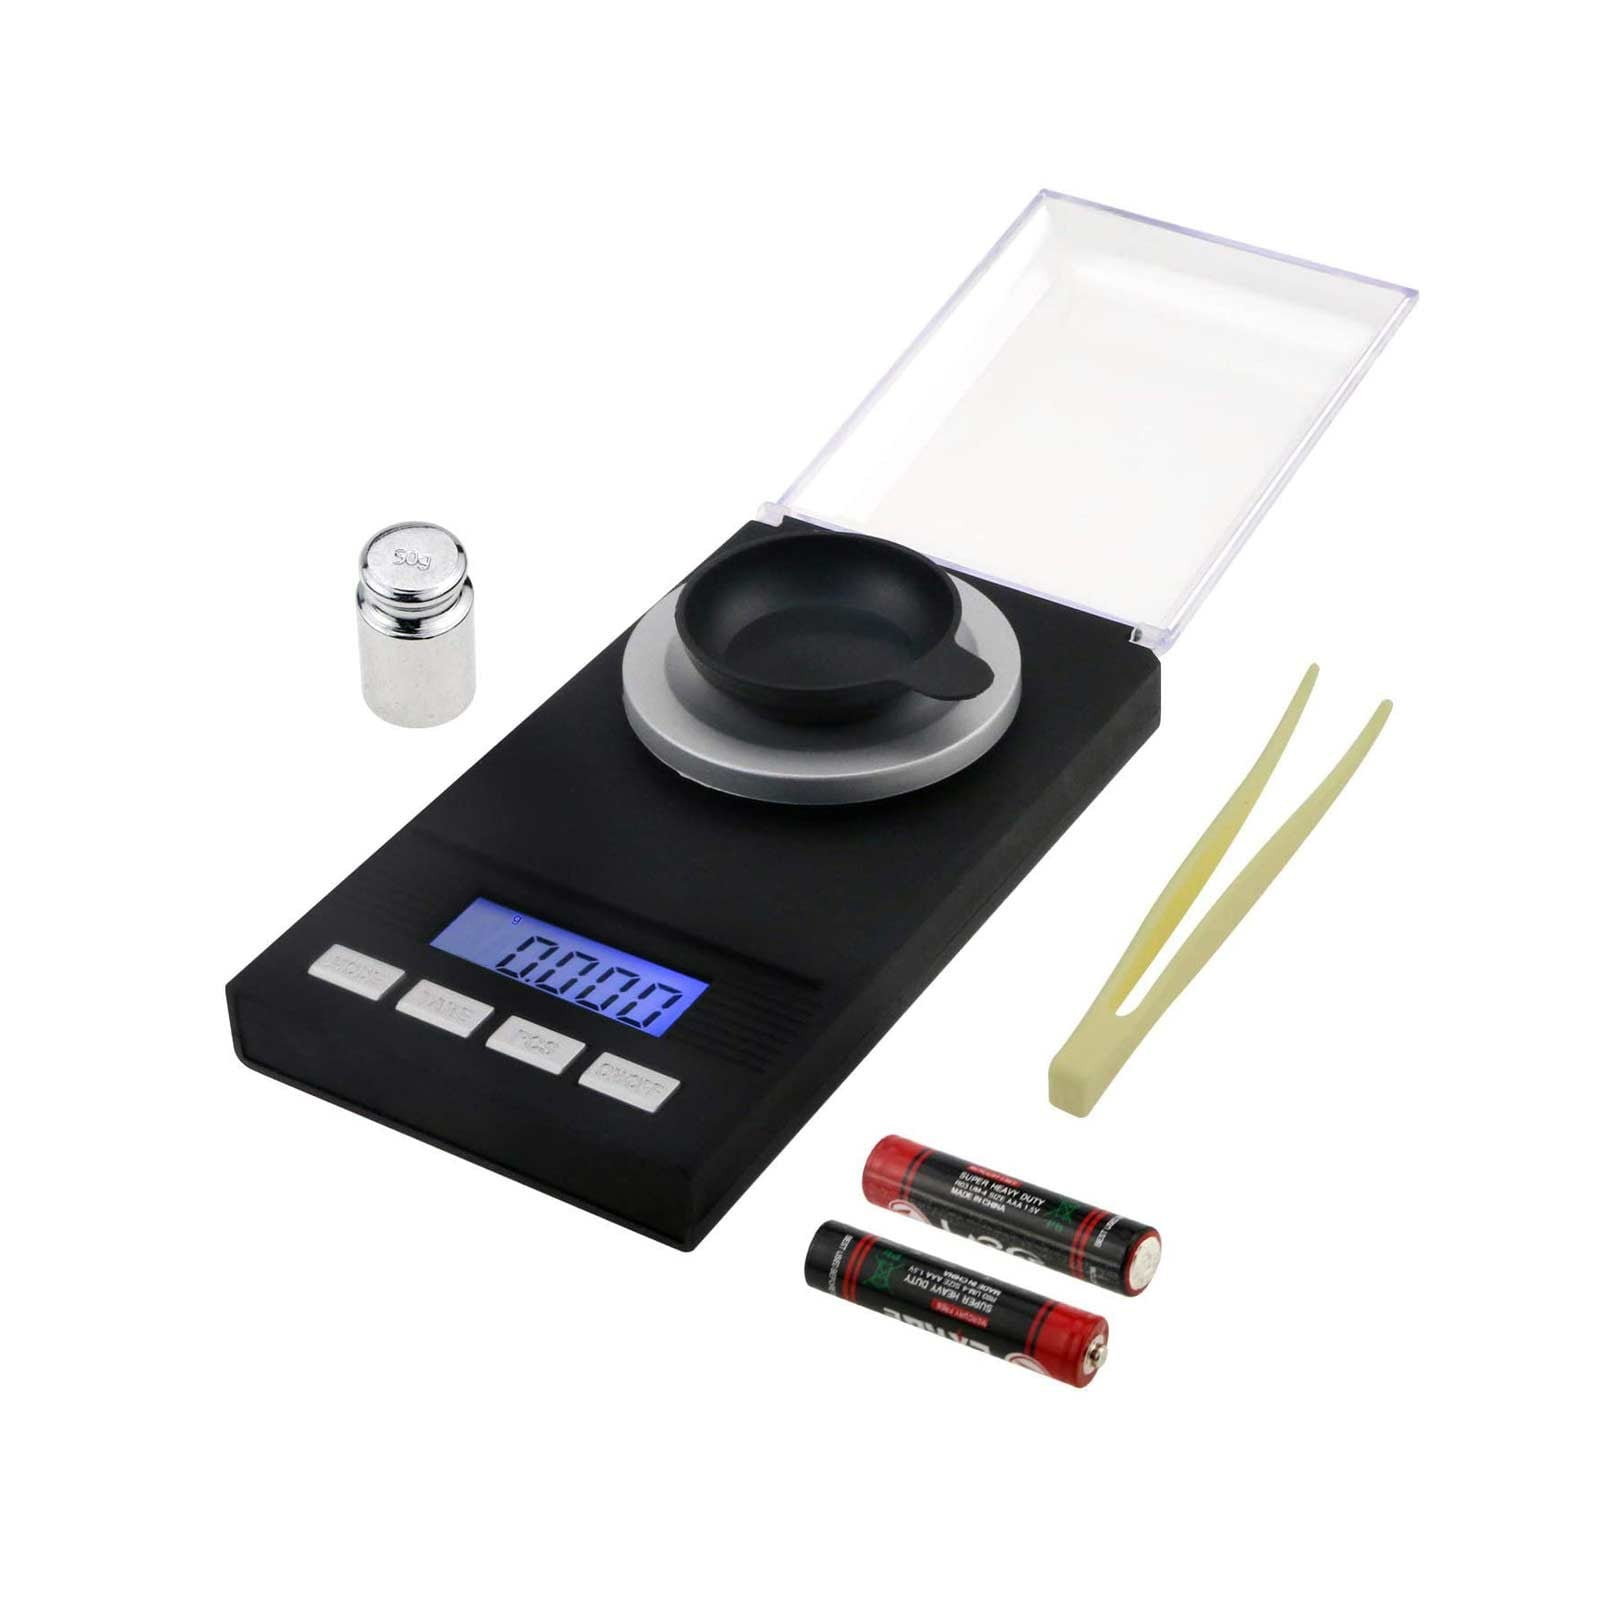 Digital High Precision Gram Scale Electric LCD Display Jewelry Drug Scale #8Y 